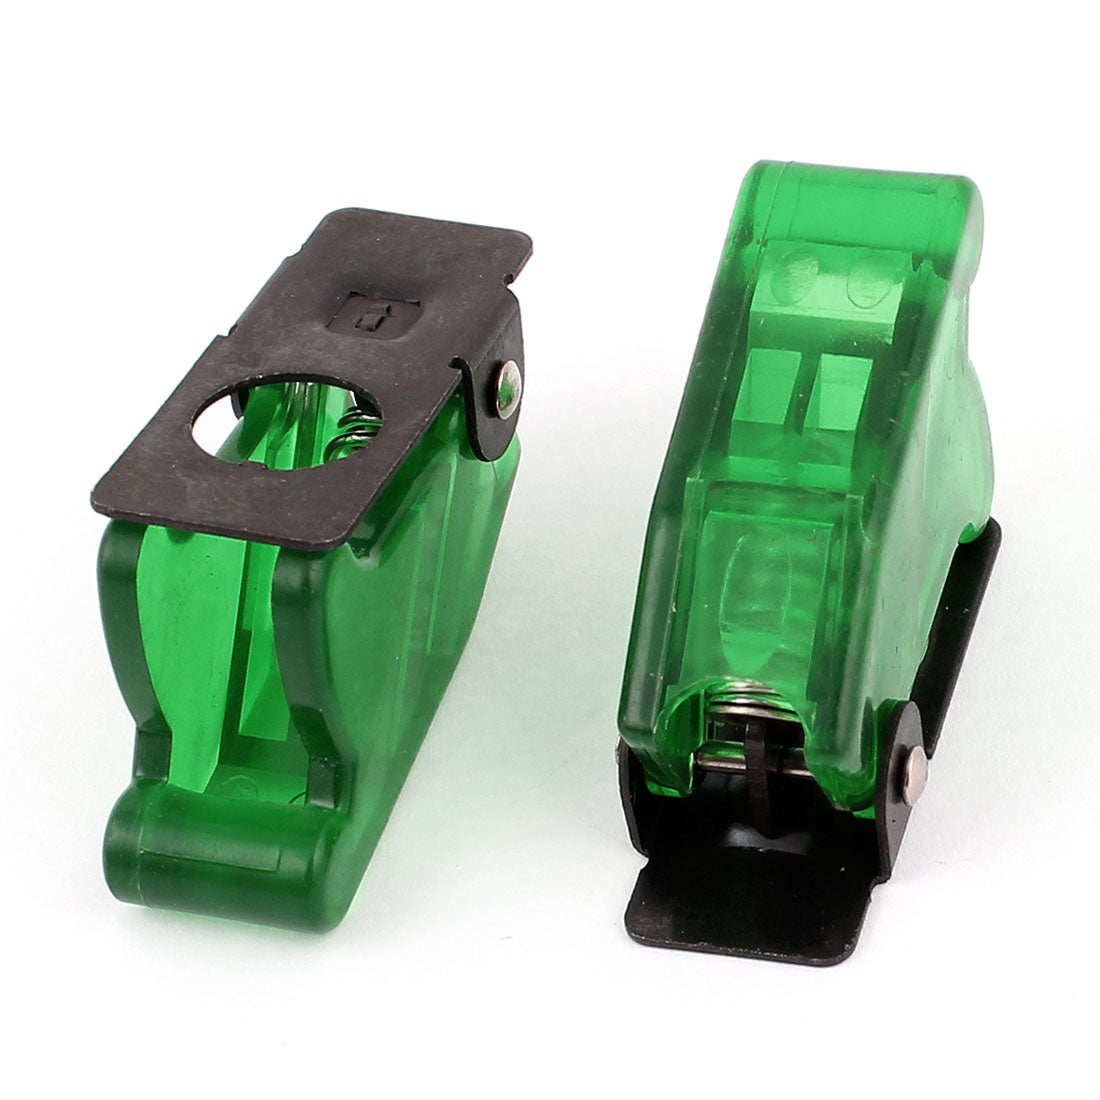 uxcell Uxcell 2Pcs Waterproof Green Plastic Flip Safety Cover Cap Guard for 12mm Toggle Switch